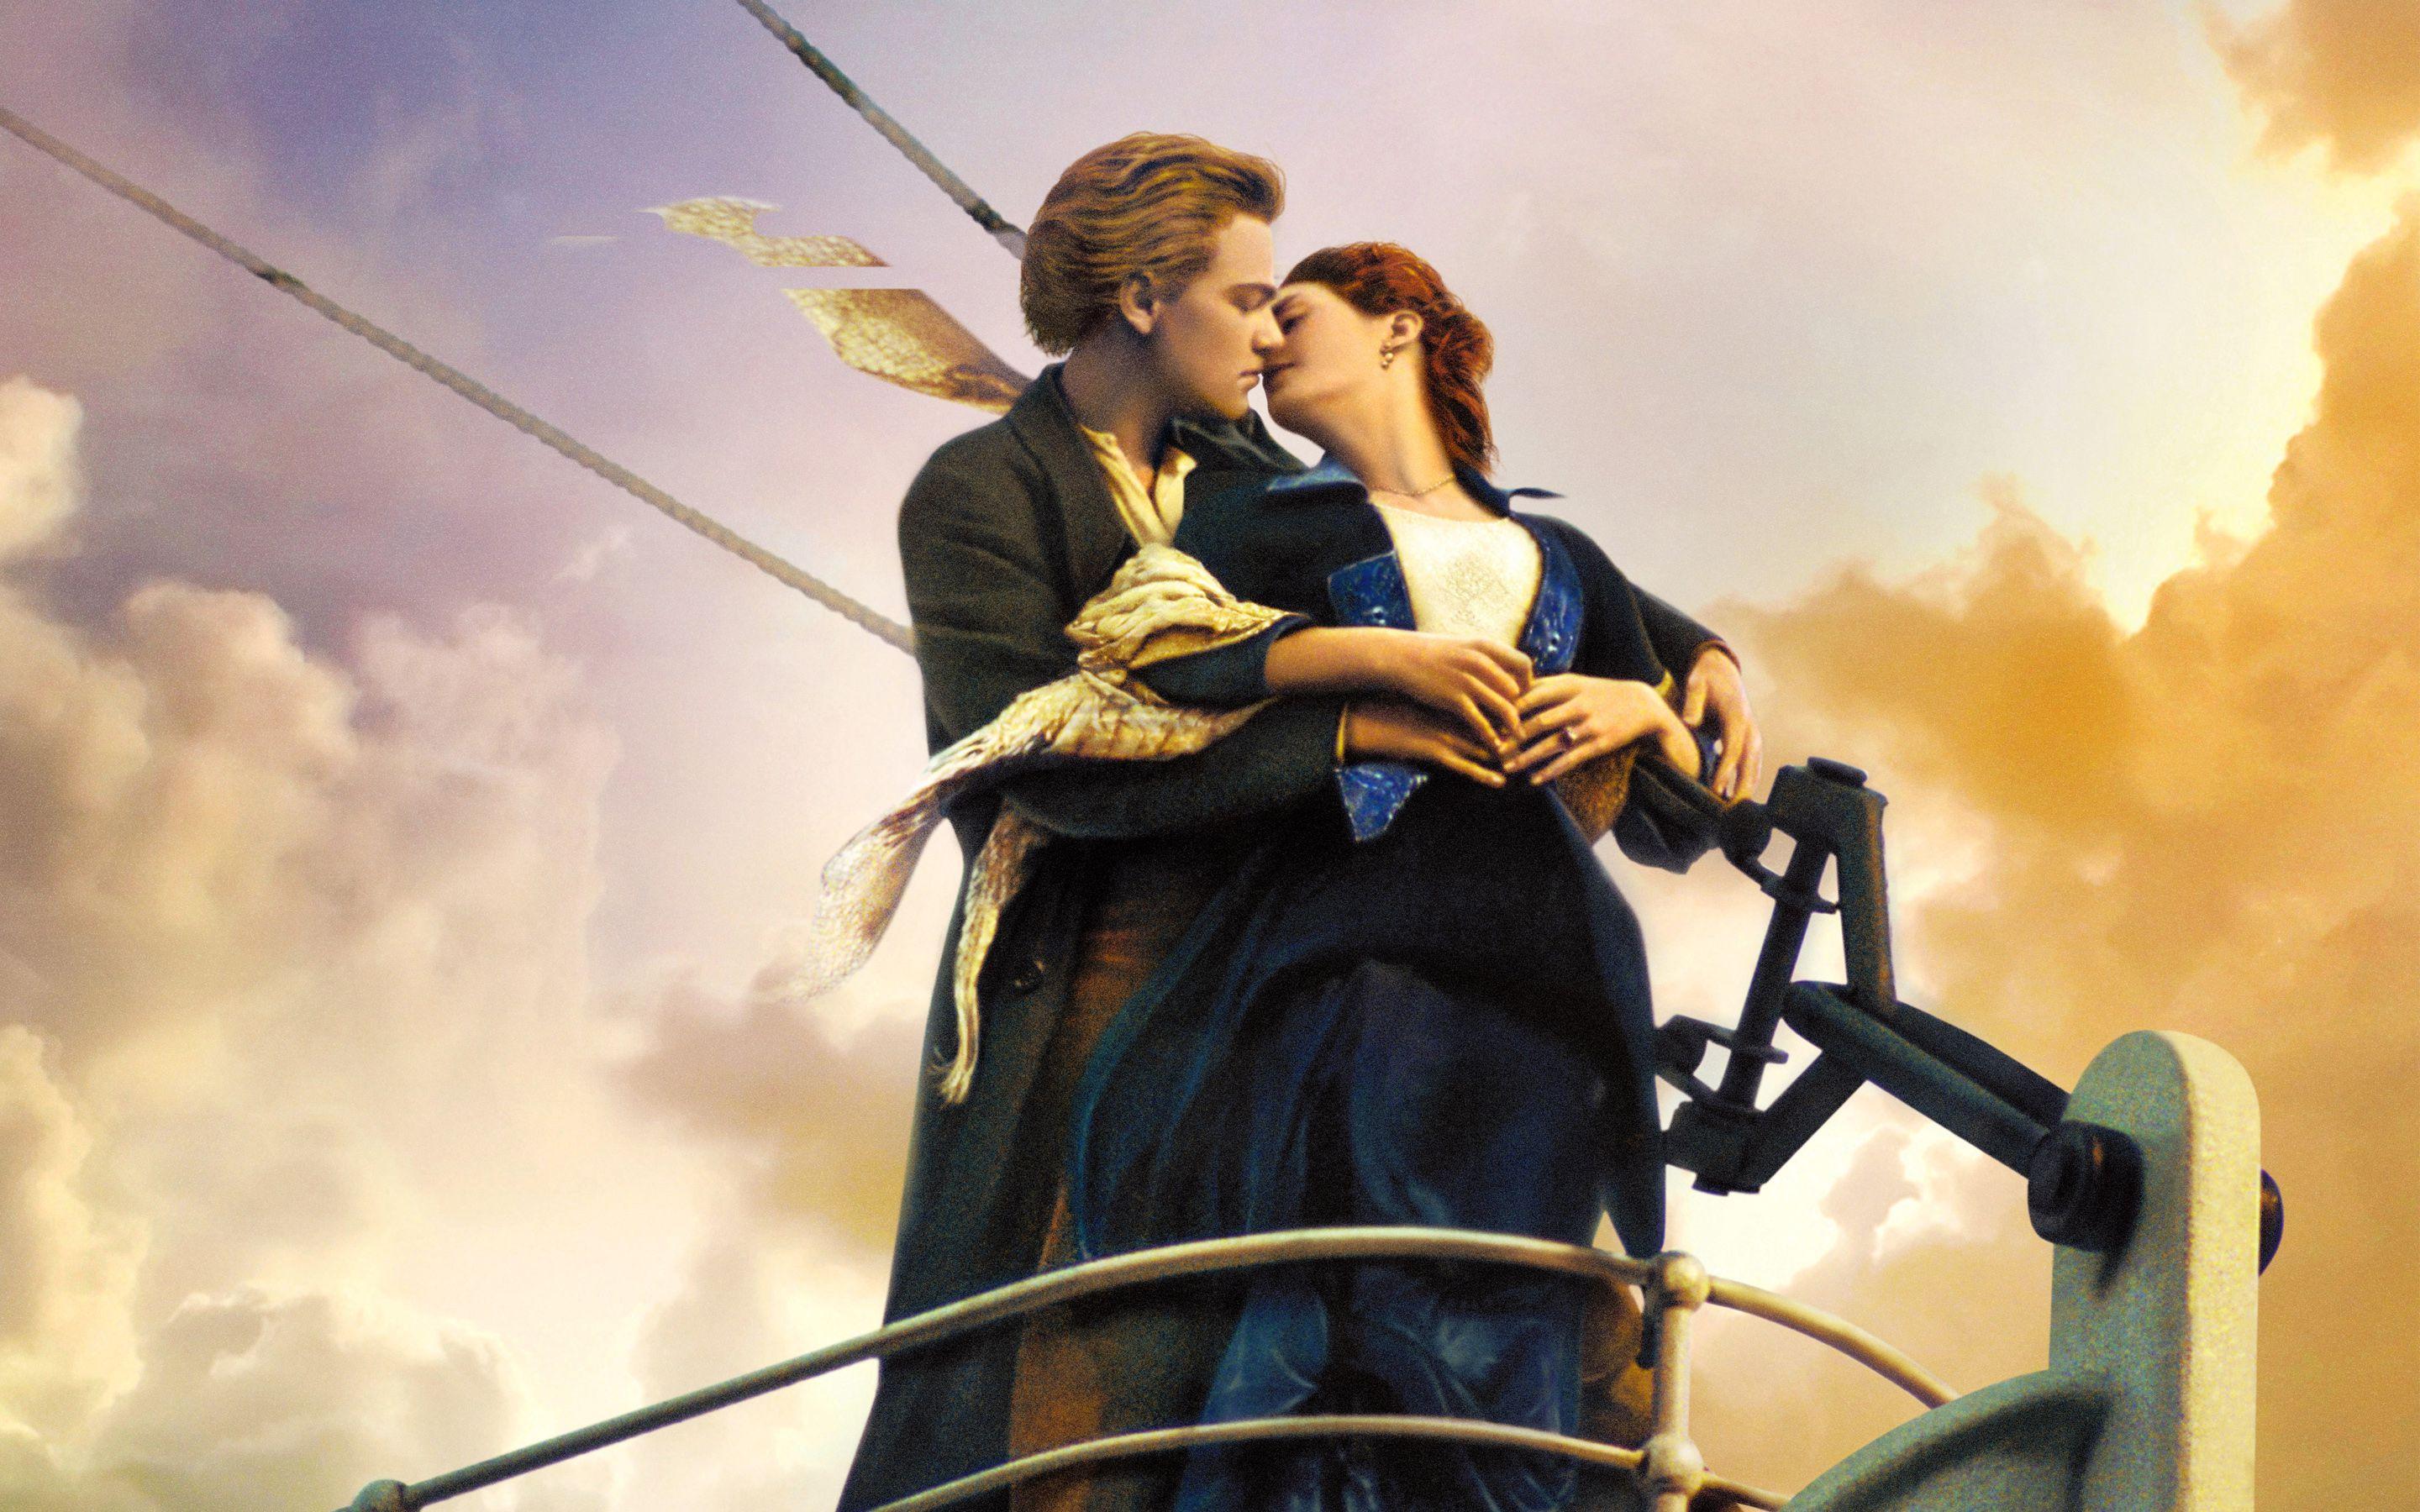 Things You Probably Didn't Know About 'Titanic' Movie